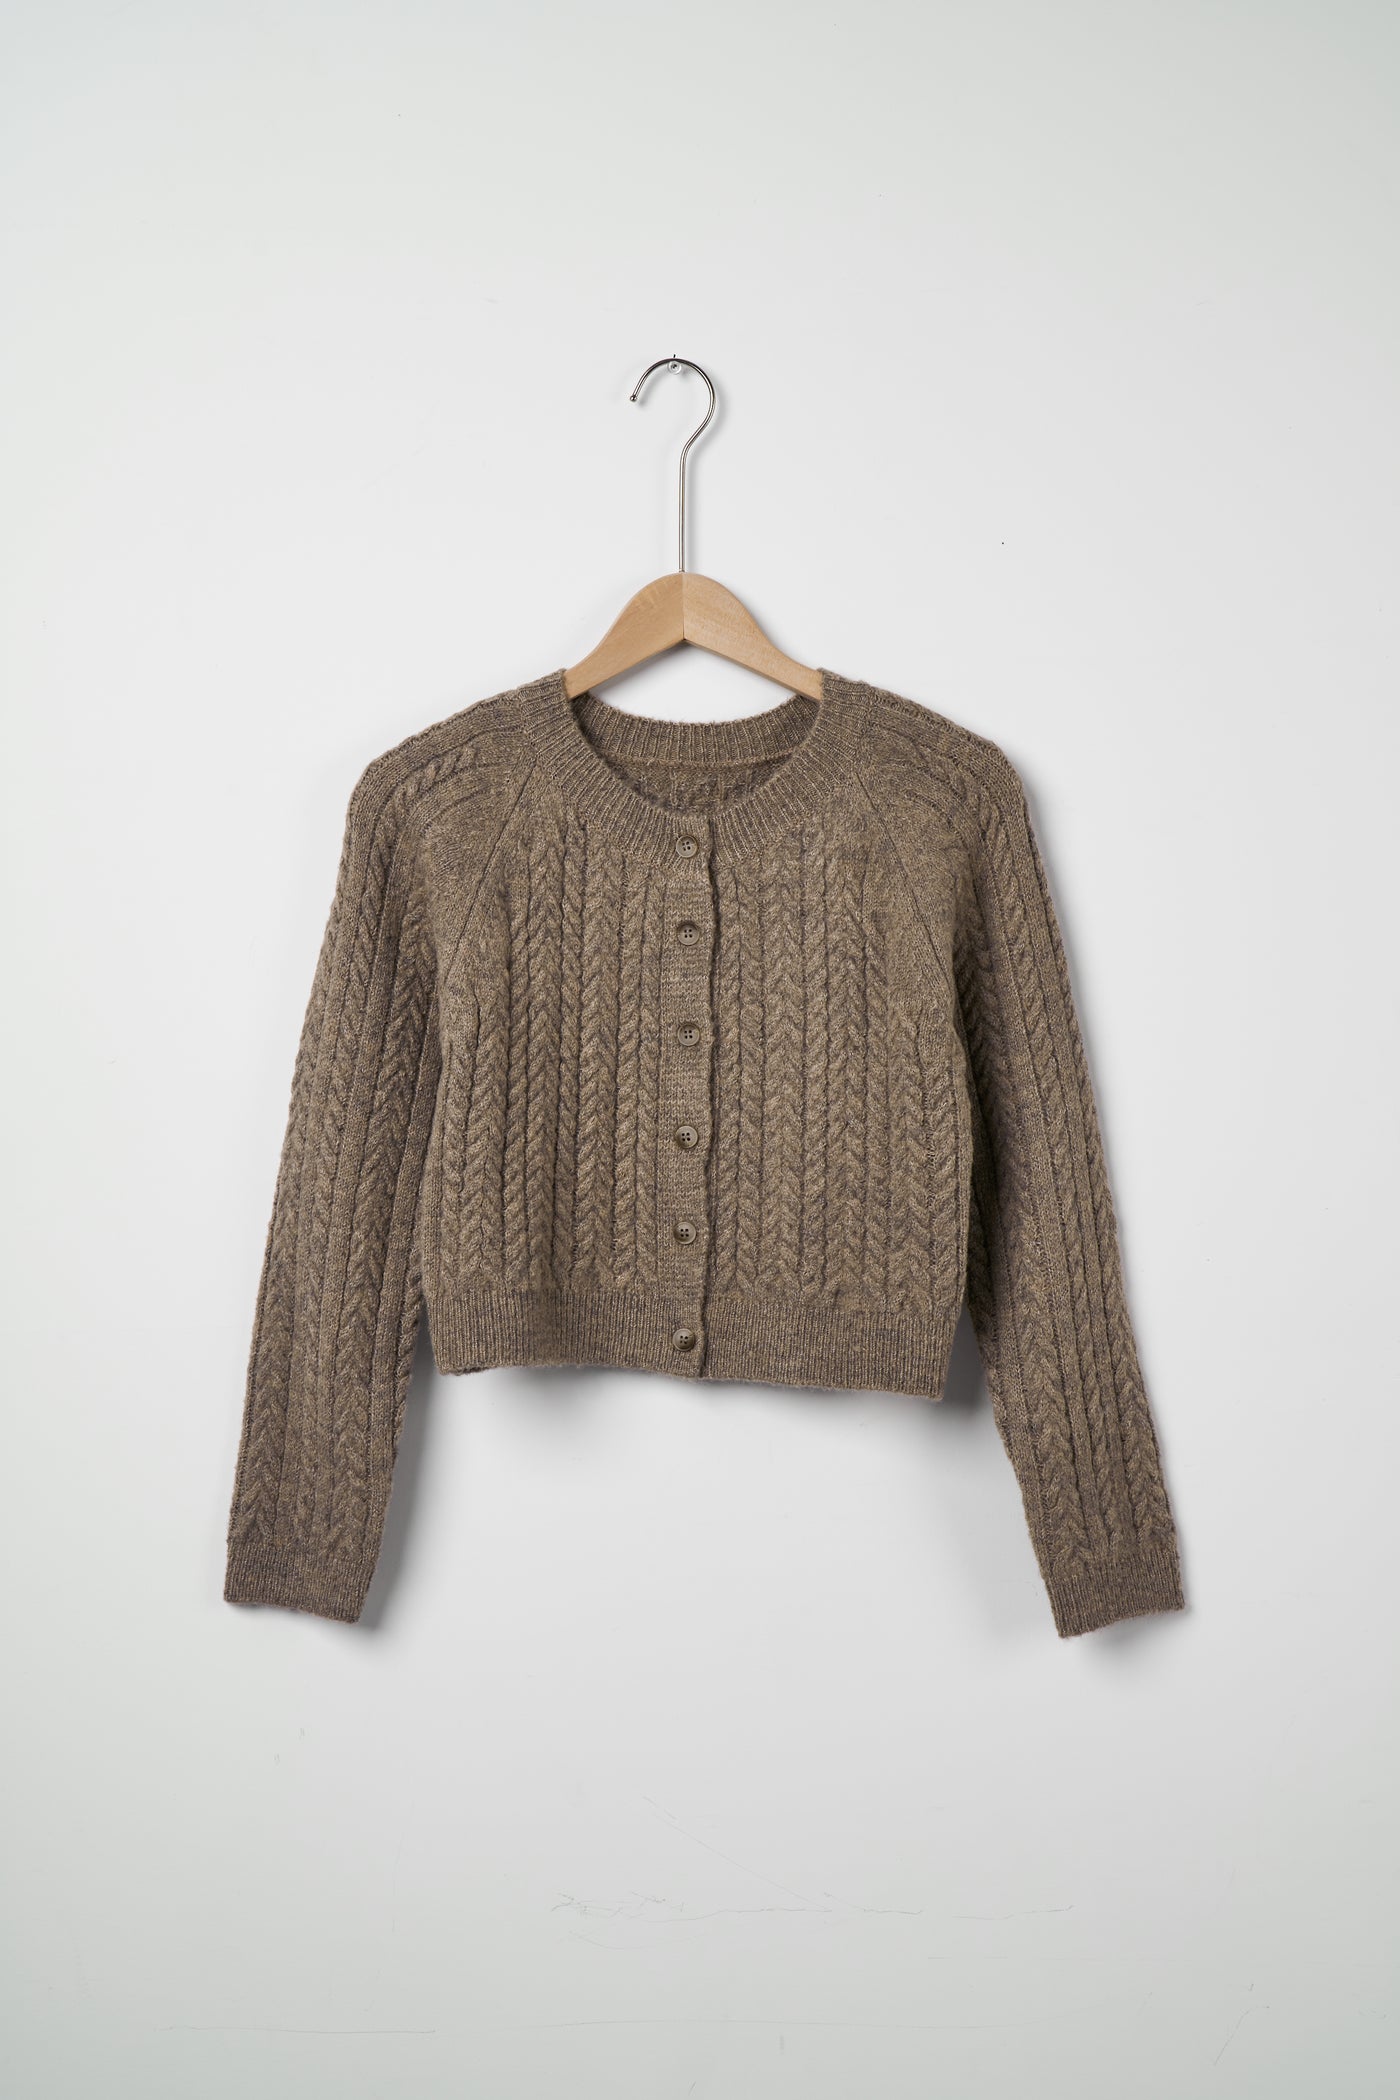 STORETS.us Ellie Cable Knitted Cardigan